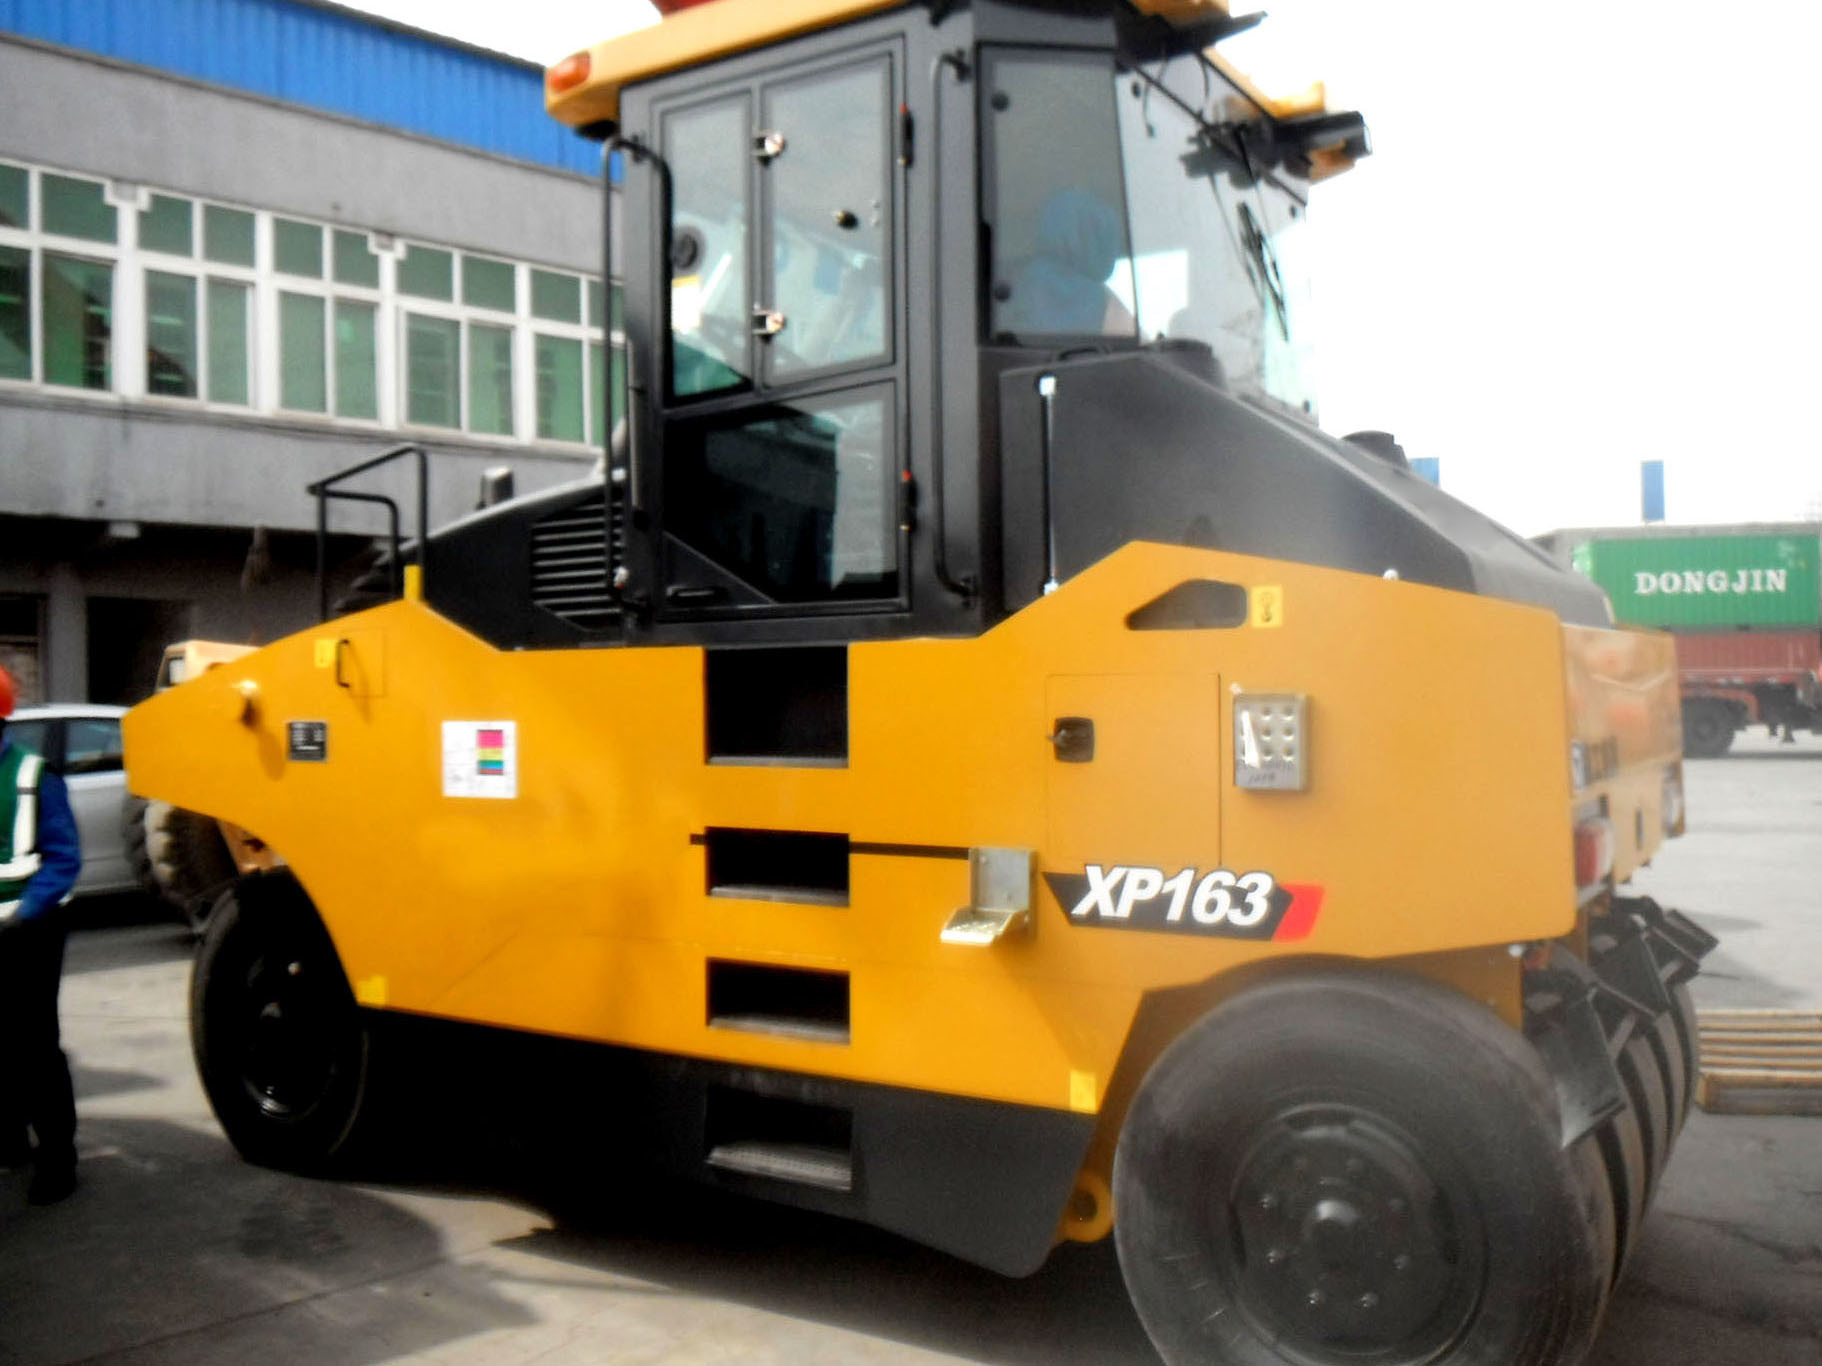 
                High Quality 10- 16 Ton Pneumatic Tire Road Roller XP163 for Sale
            